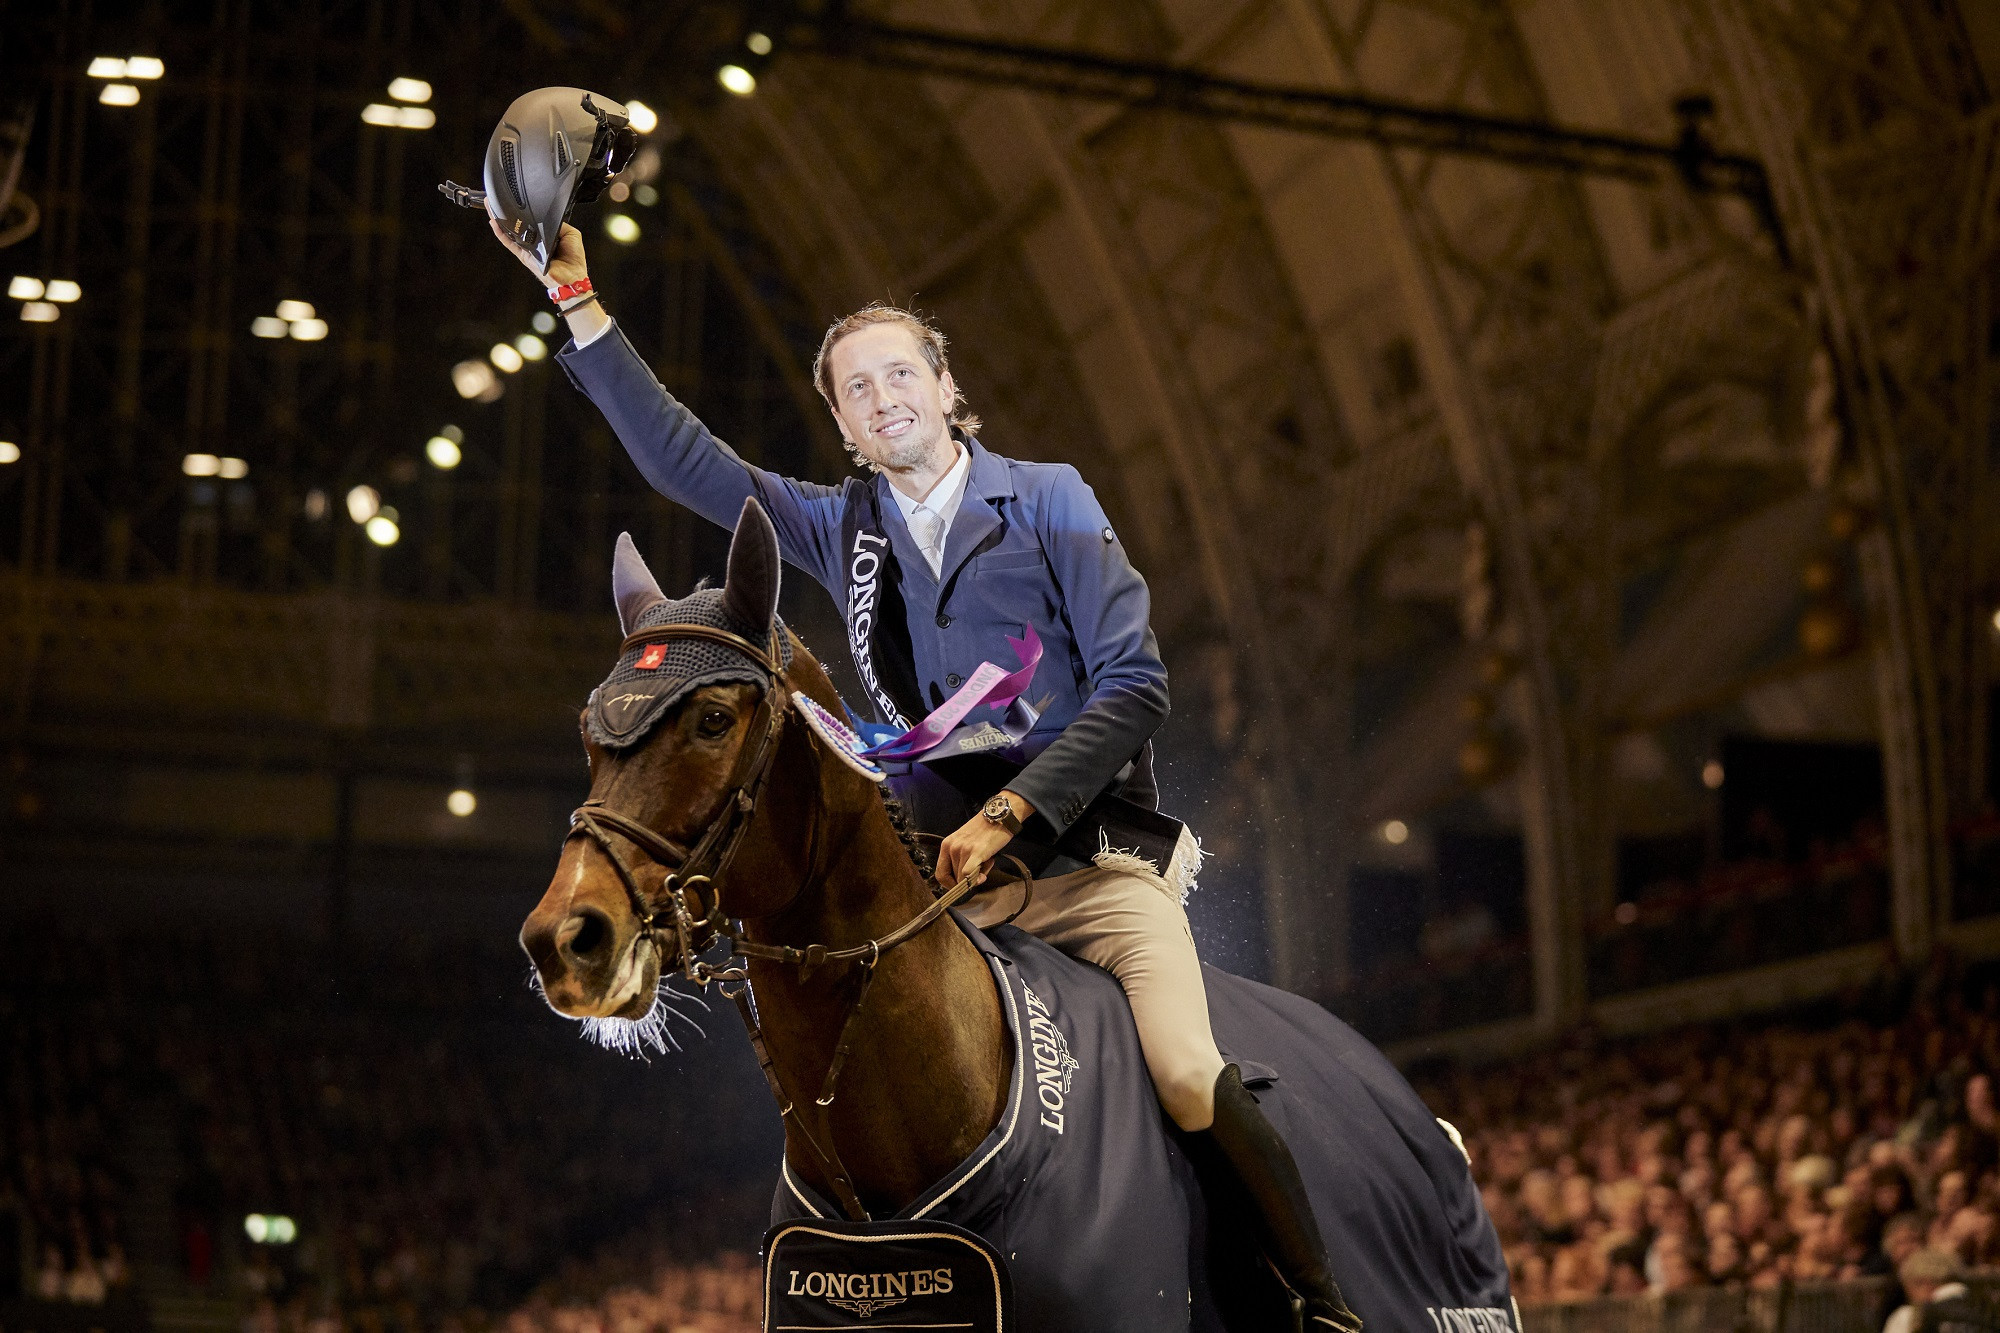 Fuchs takes over from fellow Swiss Guerdat as world number one show jumper